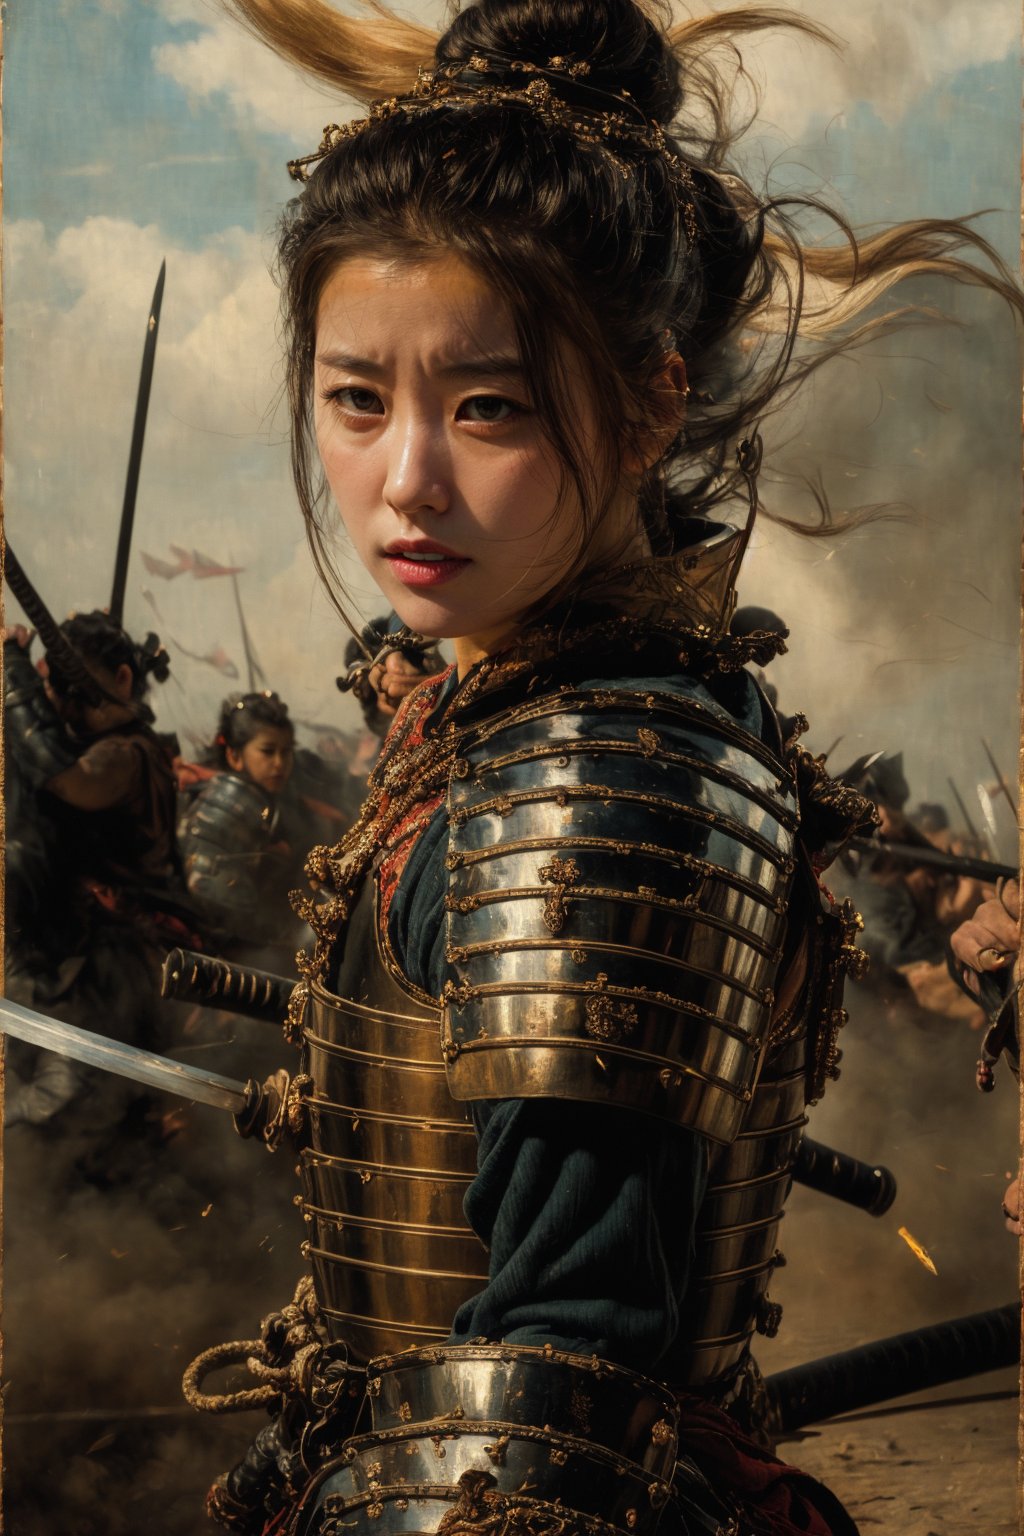 physically-based rendering, portrait, ultra-fine painting, extreme detail description, Akira Kurosawa's movie-style poster features a full-body shot of a 28-year-old girl, embodying the samurai spirit of Japan's Warring States Period, An enigmatic female samurai warrior, clad in ornate armor , This striking depiction, seemingly bursting with unspoken power, illustrates a fierce and formidable female warrior in the midst of battle. The image, likely a detailed painting, showcases the intensity of the female samurai's gaze and the intricate craftsmanship of his armor. Each intricately depicted detail mesmerizes the viewer, immersing them in the extraordinary skill and artistry captured in this remarkable 